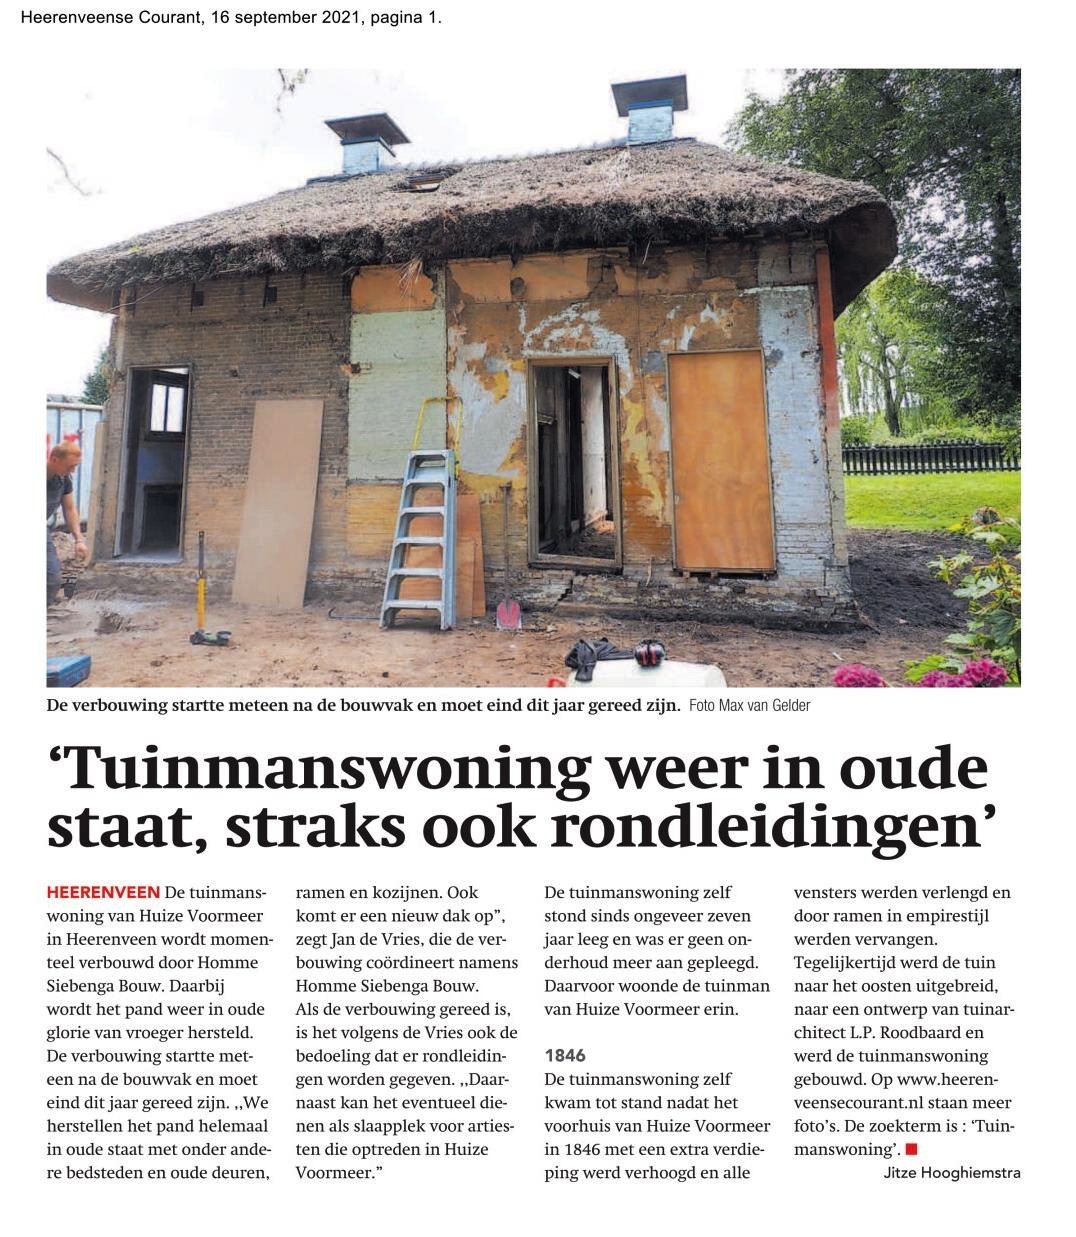 9941 2021 09 16 Tuinmanswoning weer in oude staat